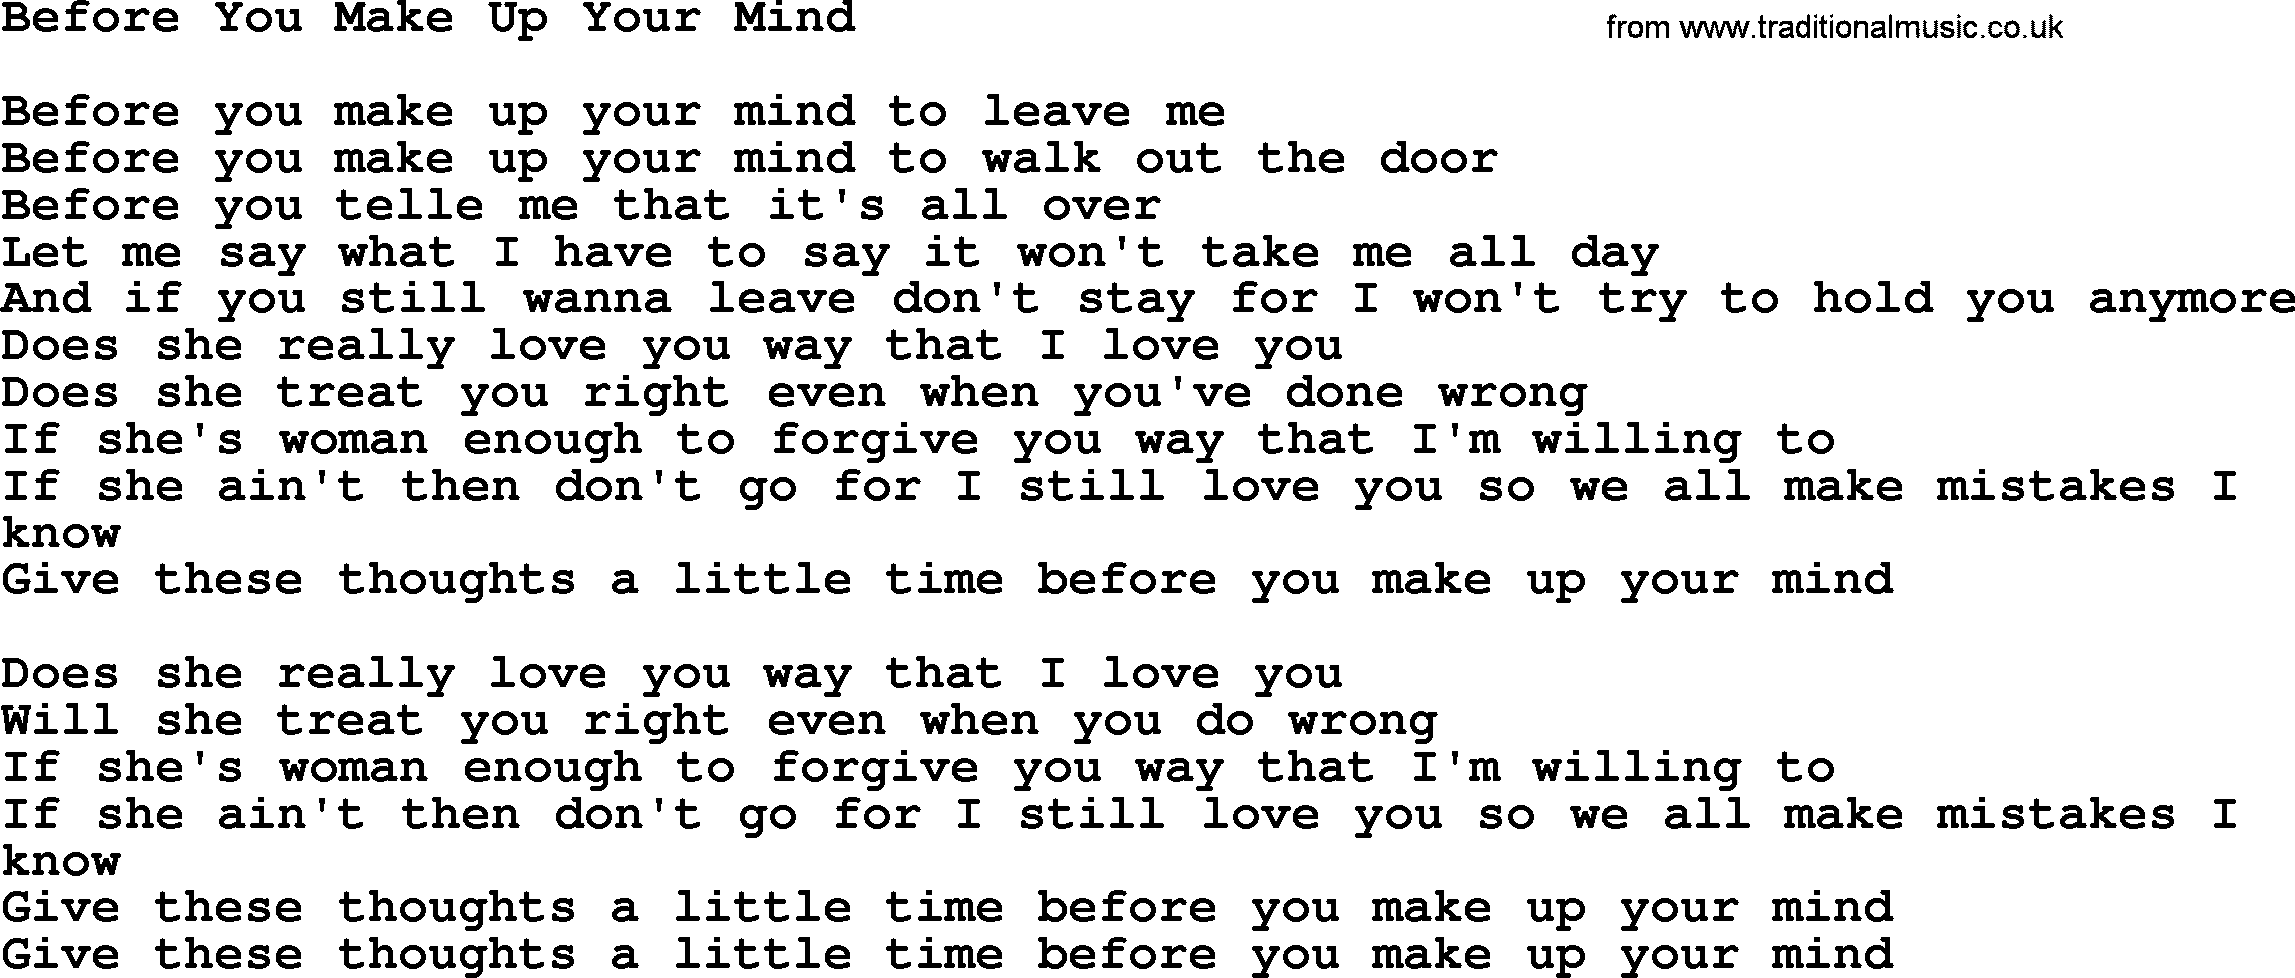 Dolly Parton song Before You Make Up Your Mind.txt lyrics